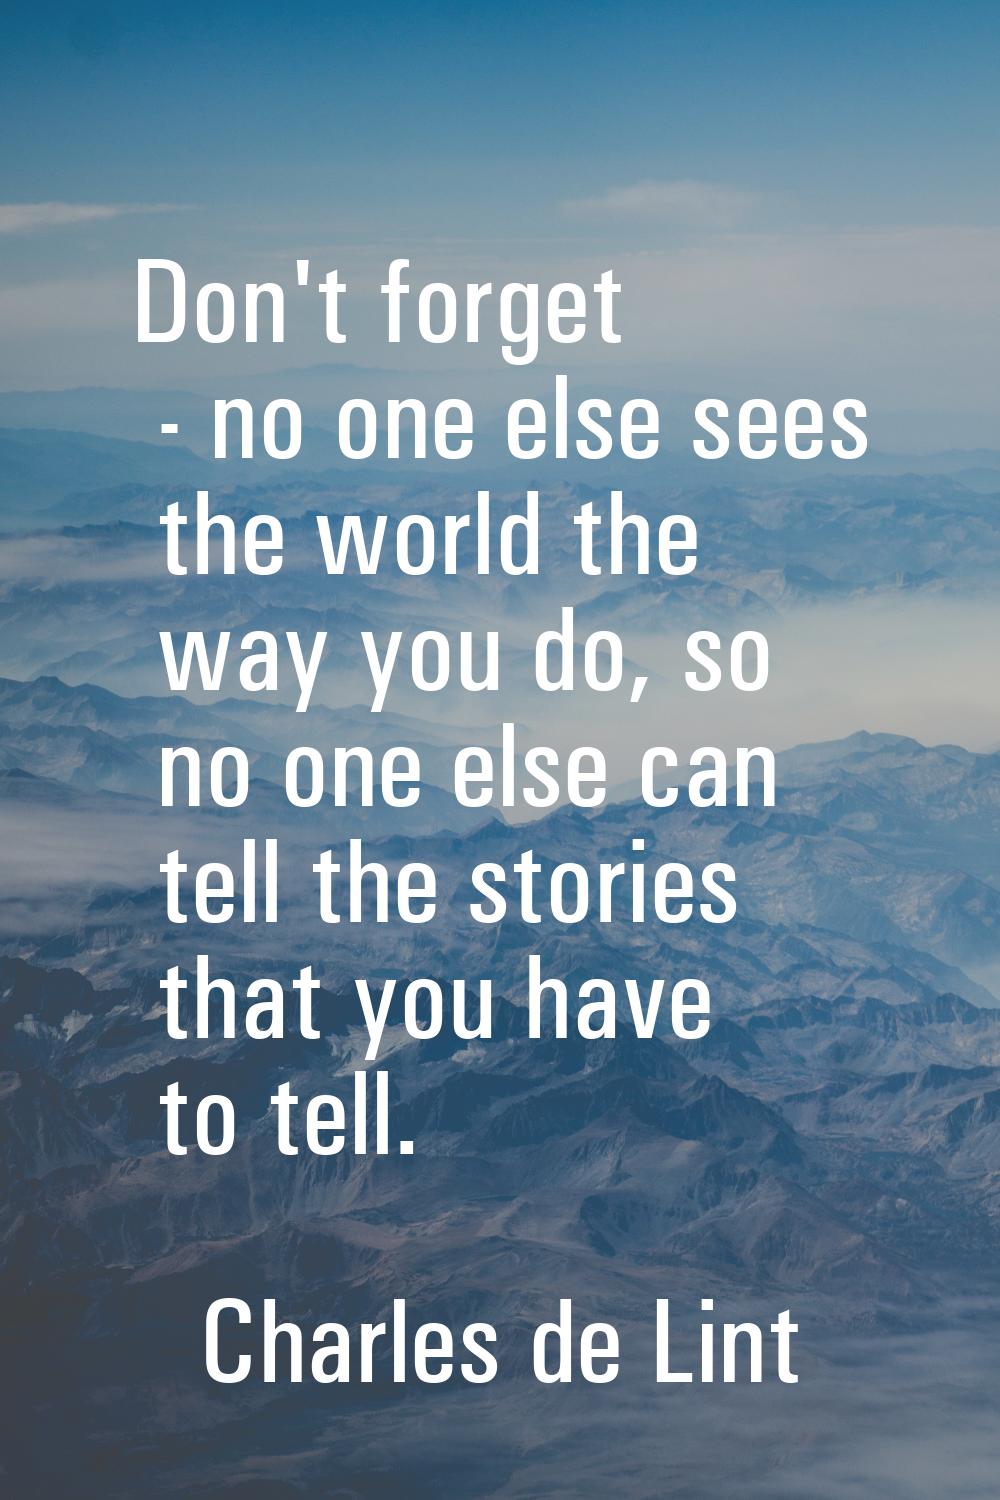 Don't forget - no one else sees the world the way you do, so no one else can tell the stories that 